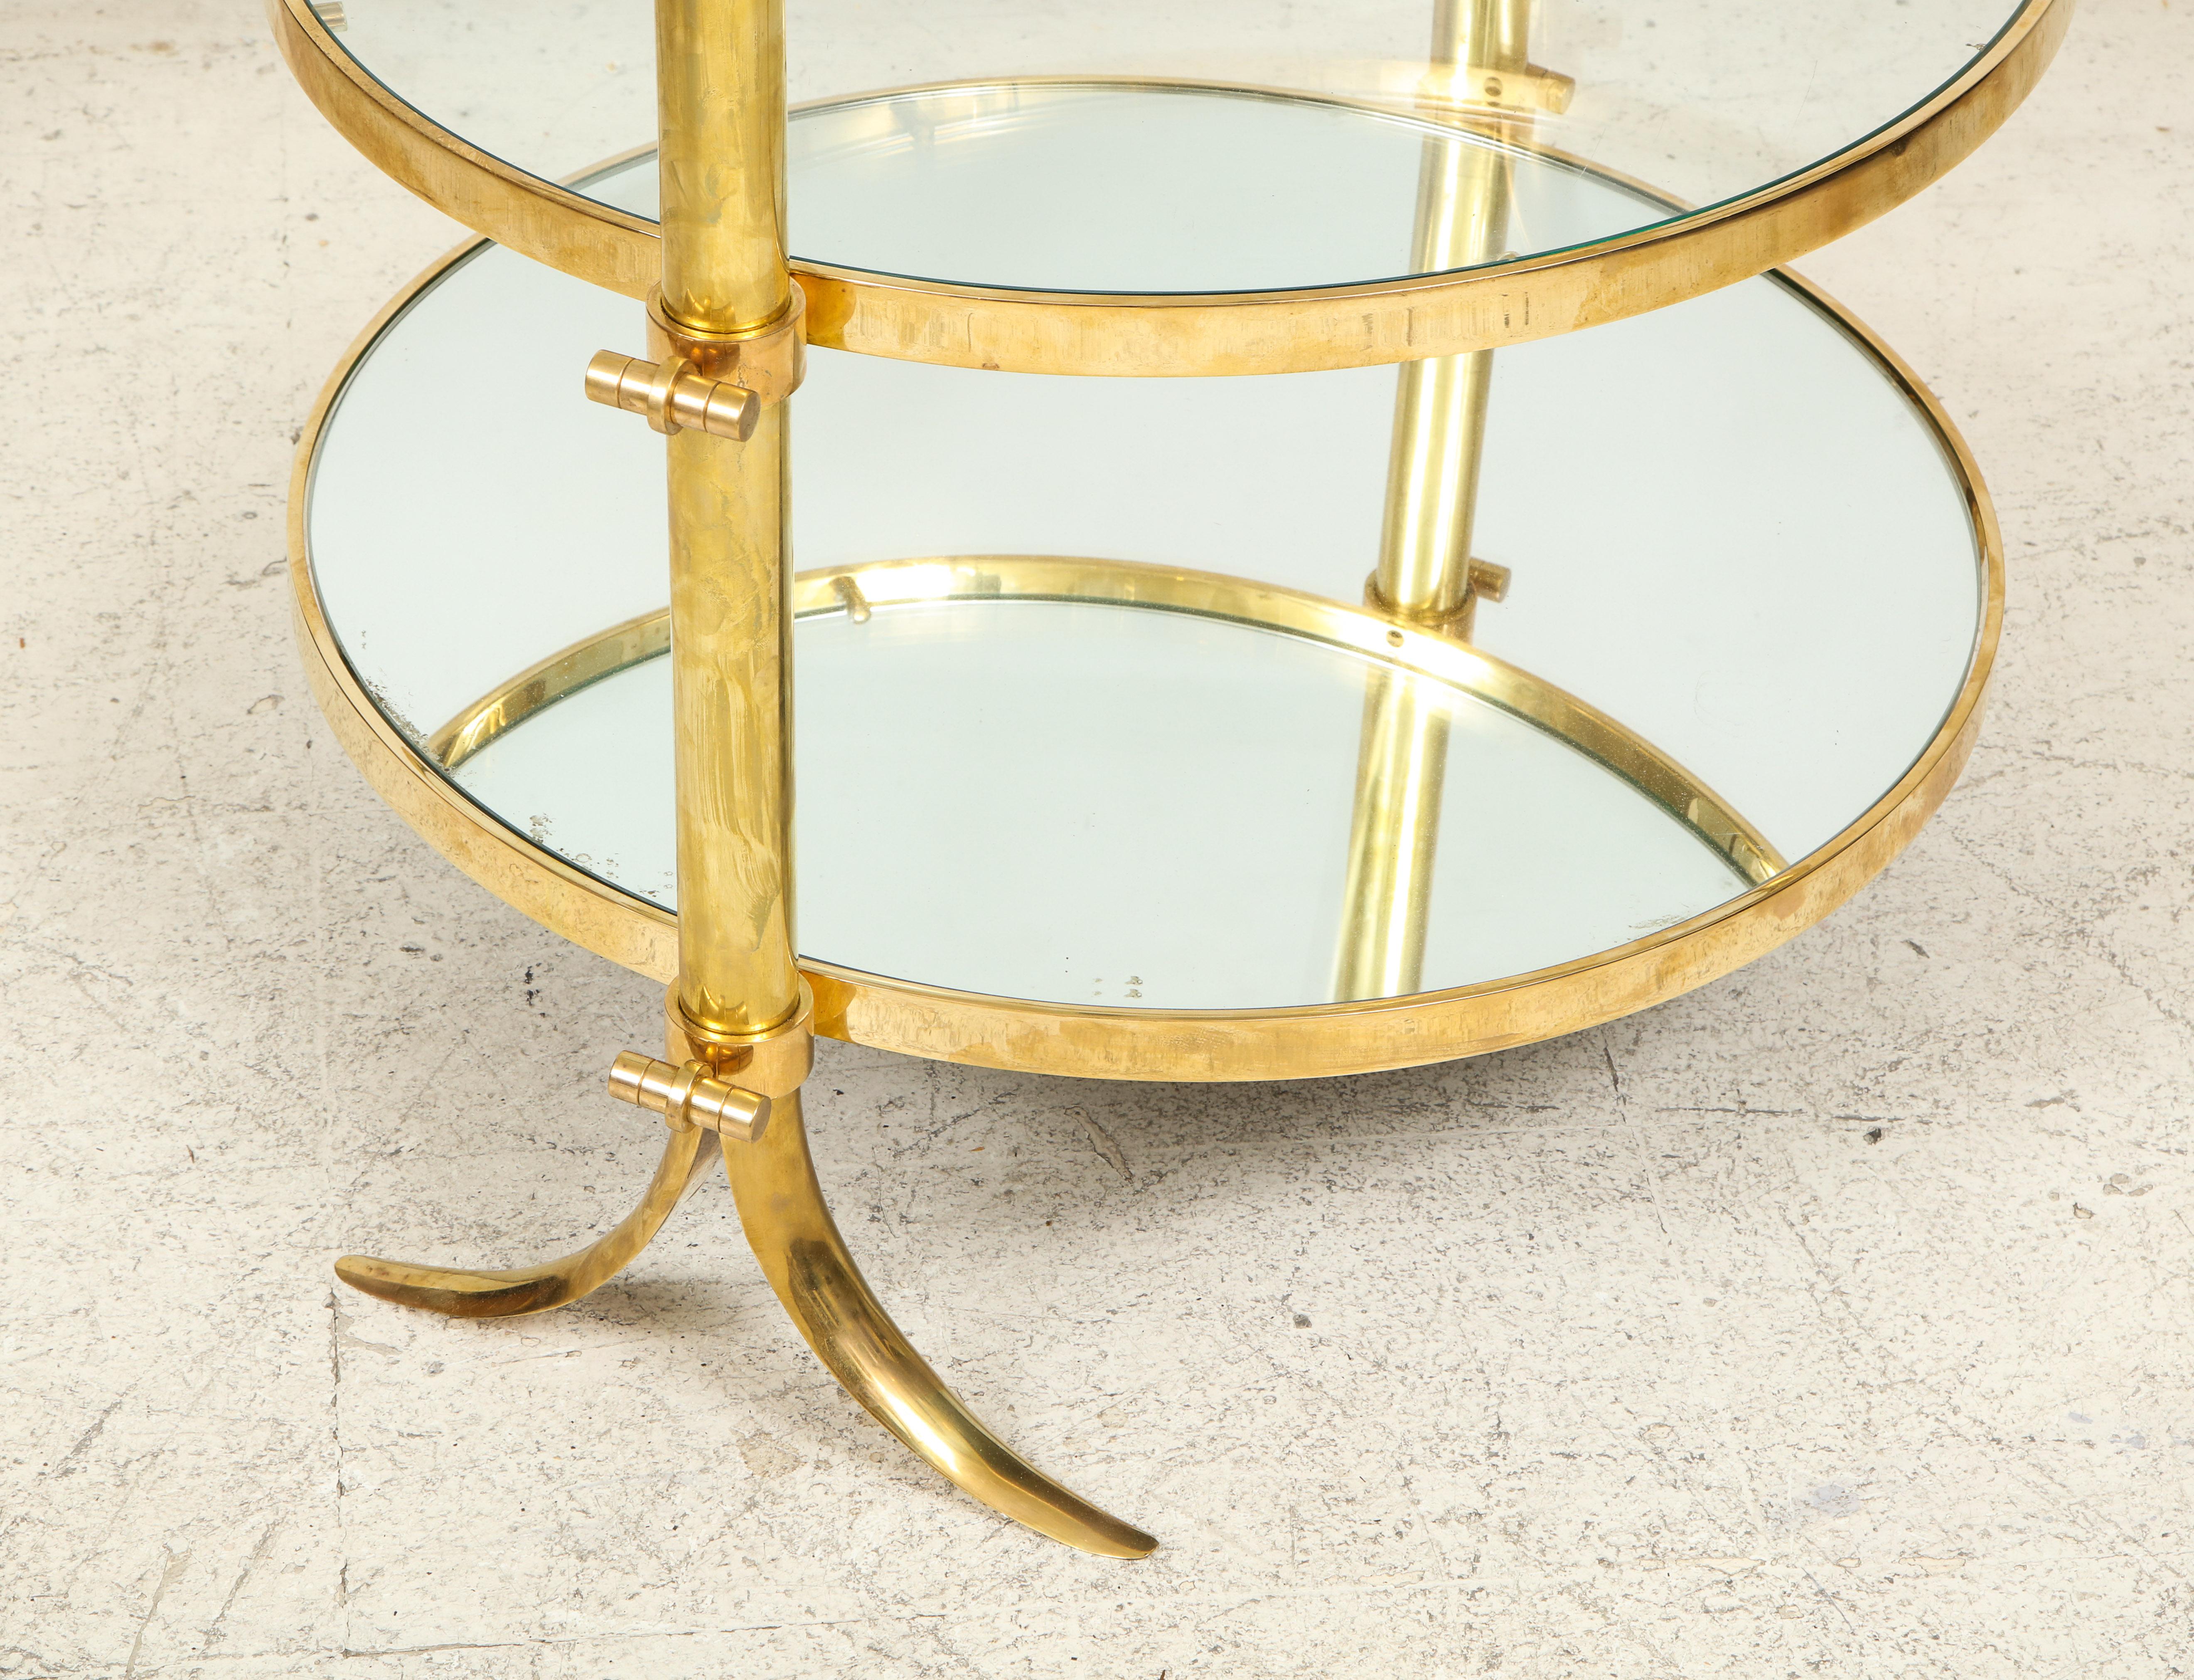 American Bespoke Three-Tiered Brass Tulip Table by Amir Khamneipur For Sale